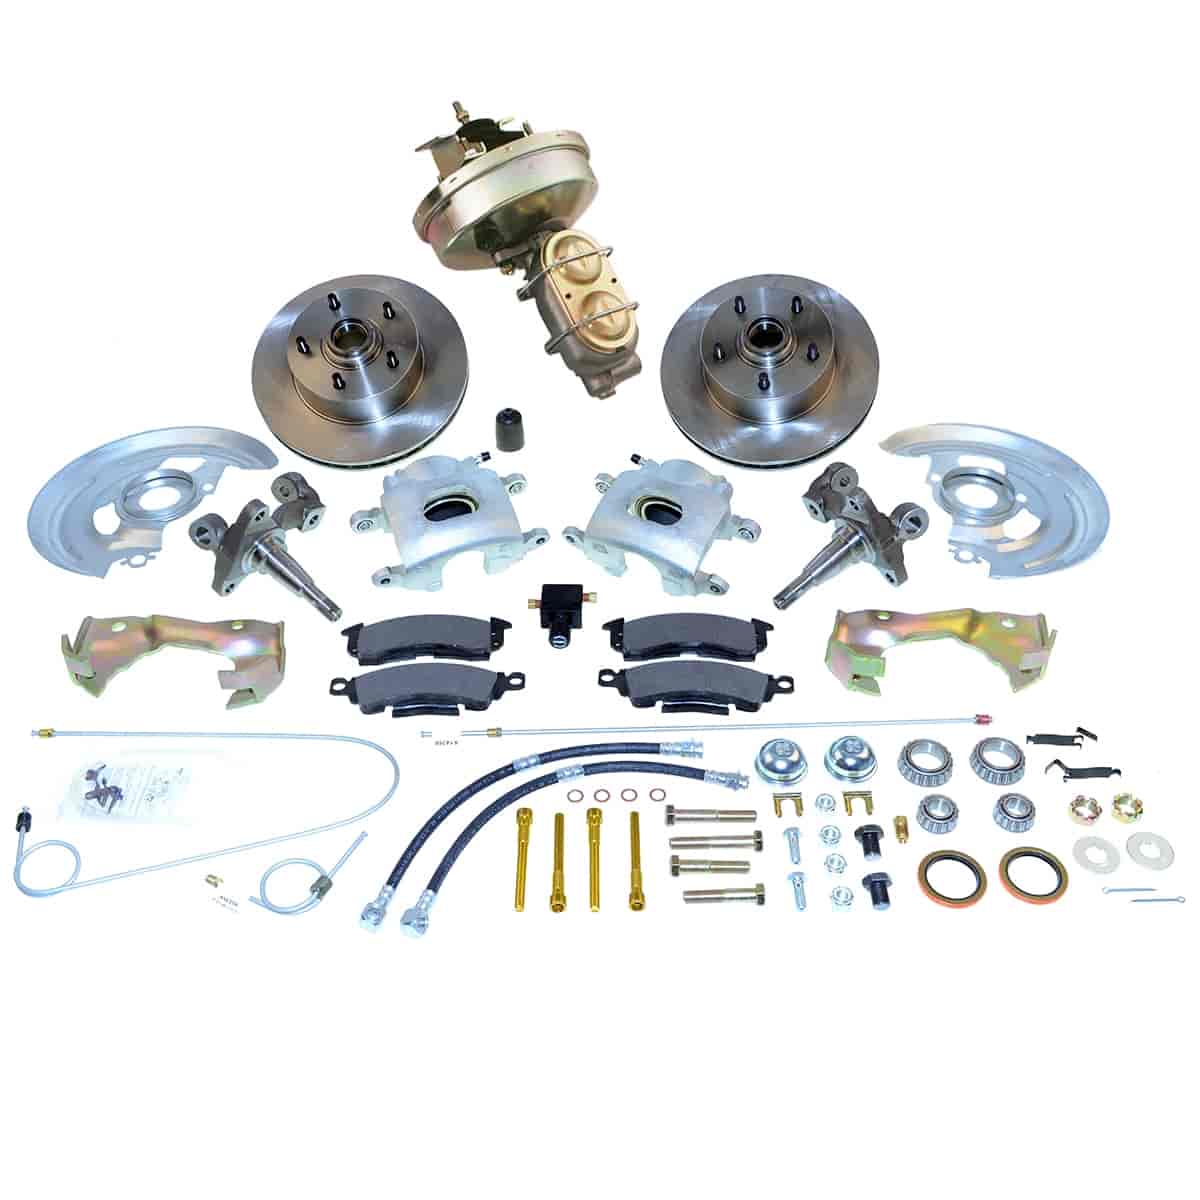 Stainless Steel Brakes A123 1 Front Drum to Disc Brake Conversion Kit